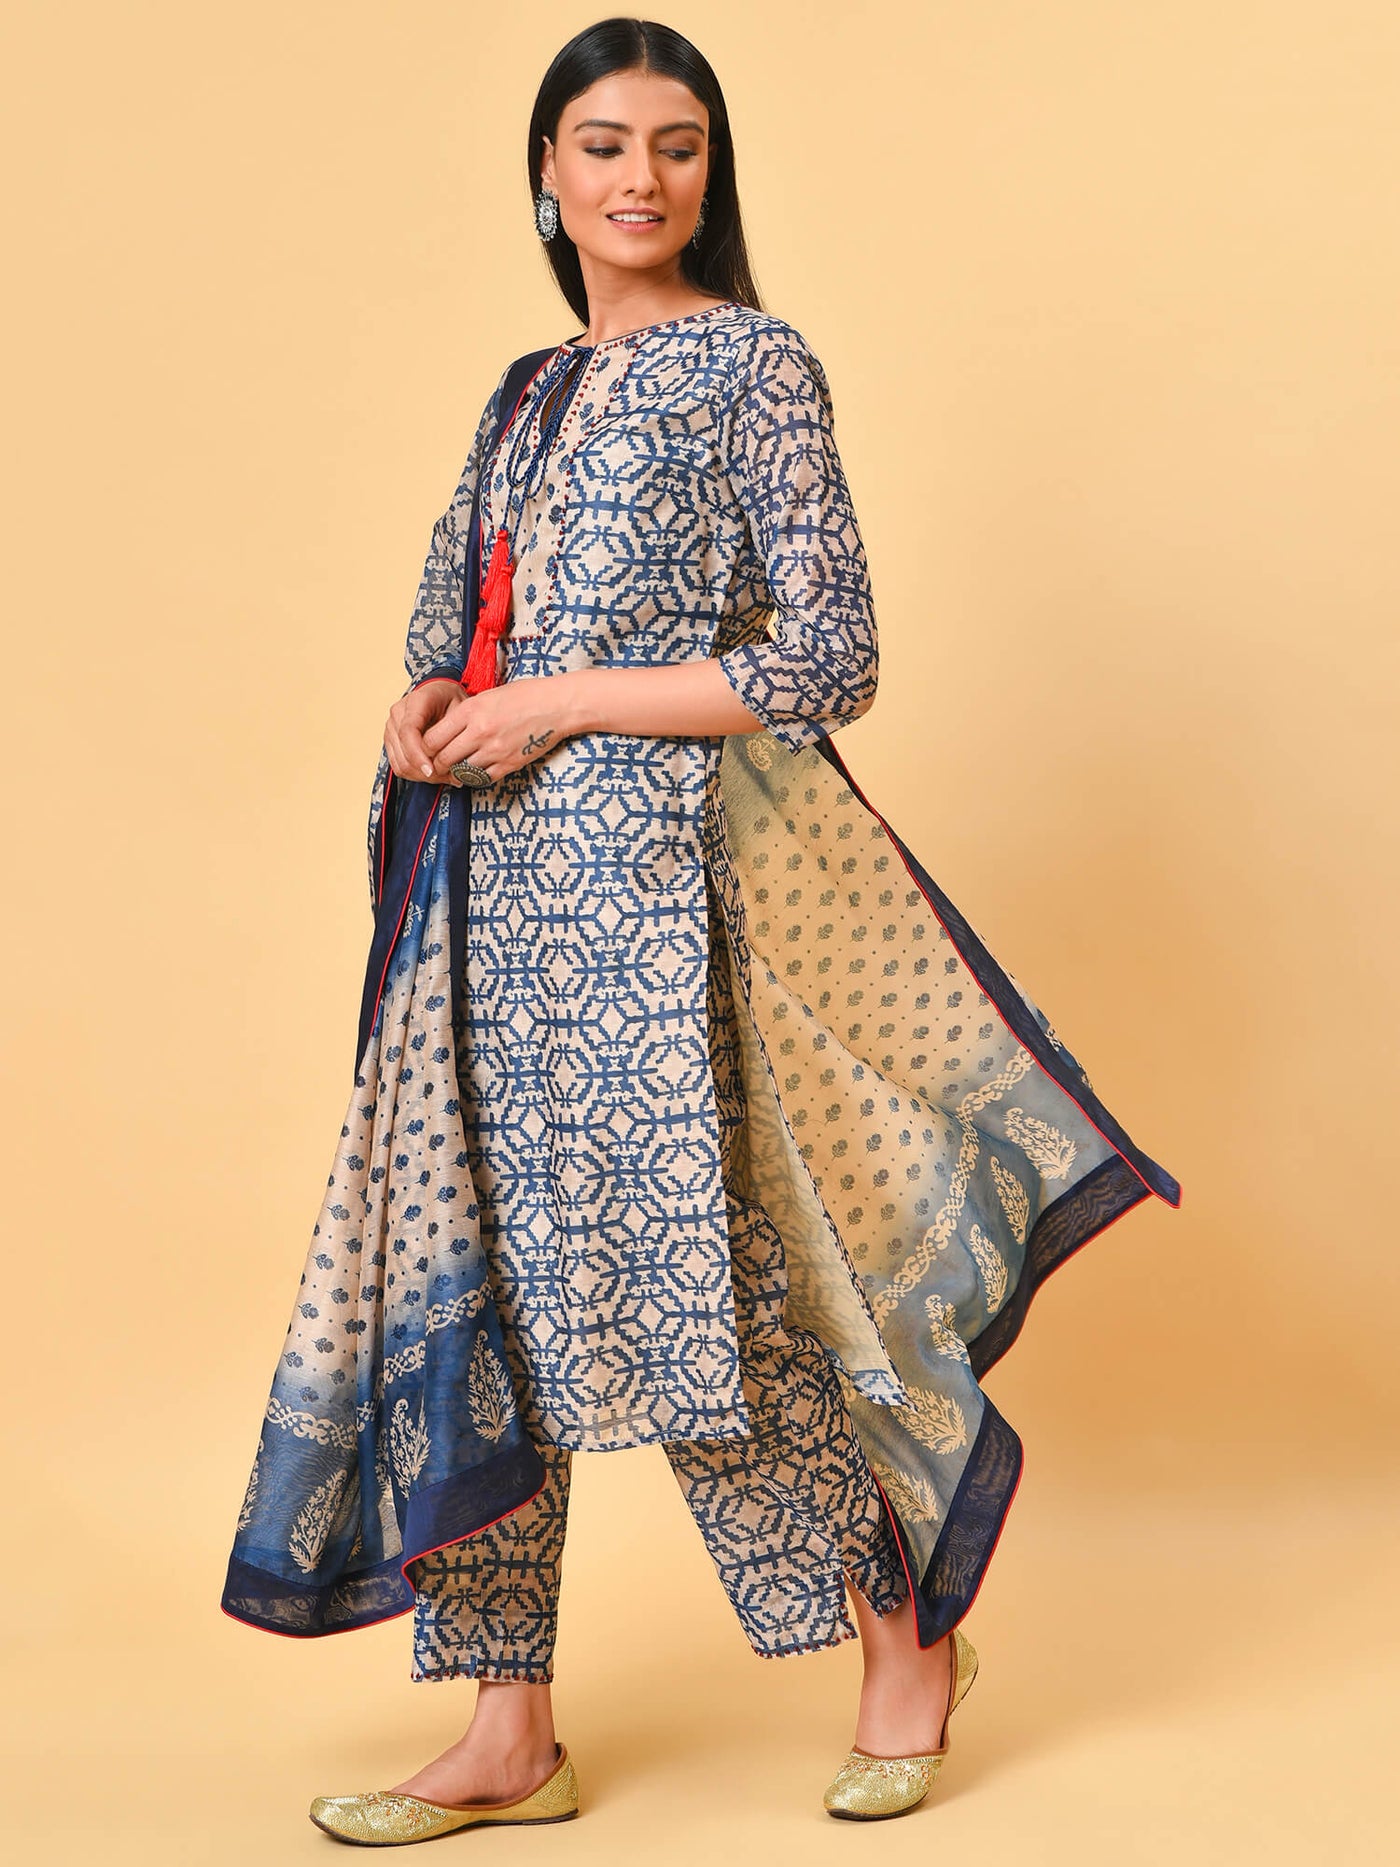 True and not so blue in the chanderi kurta pant and dupatta